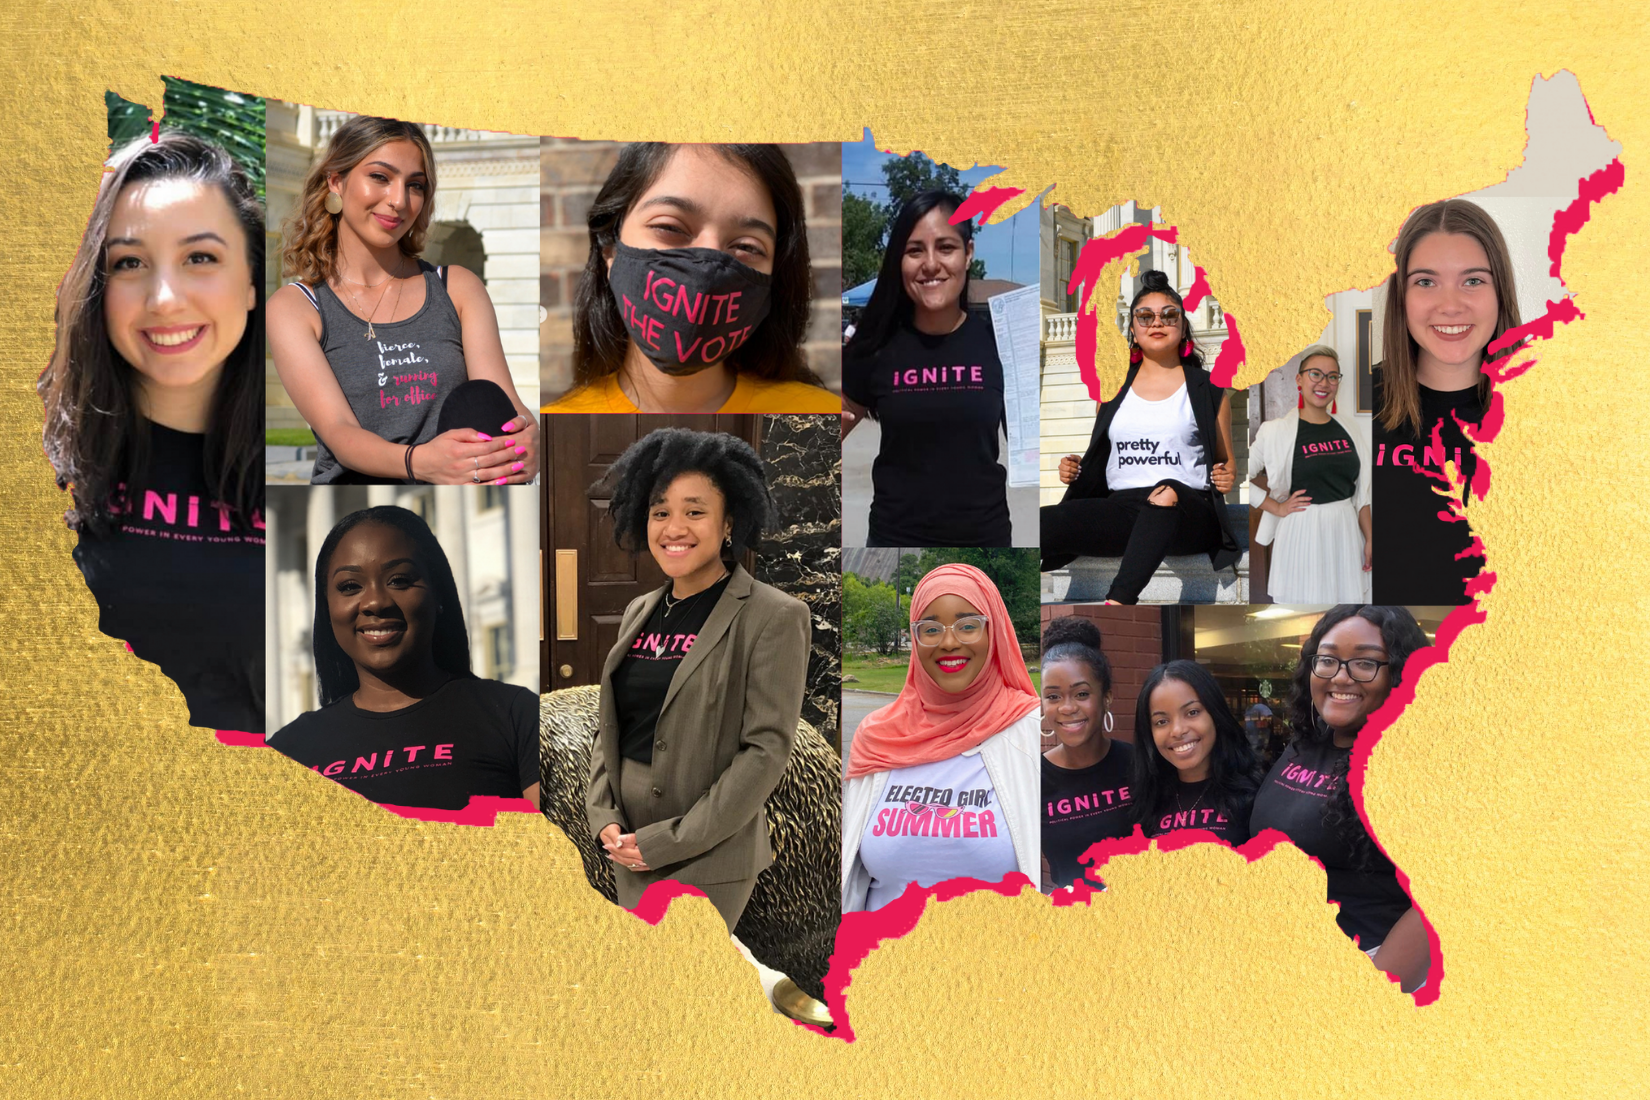 As 2021 closes, I want to share just a few reflections that influence how IGNITE will continue to champion change in the year to come. IGNITE national sara guillermo